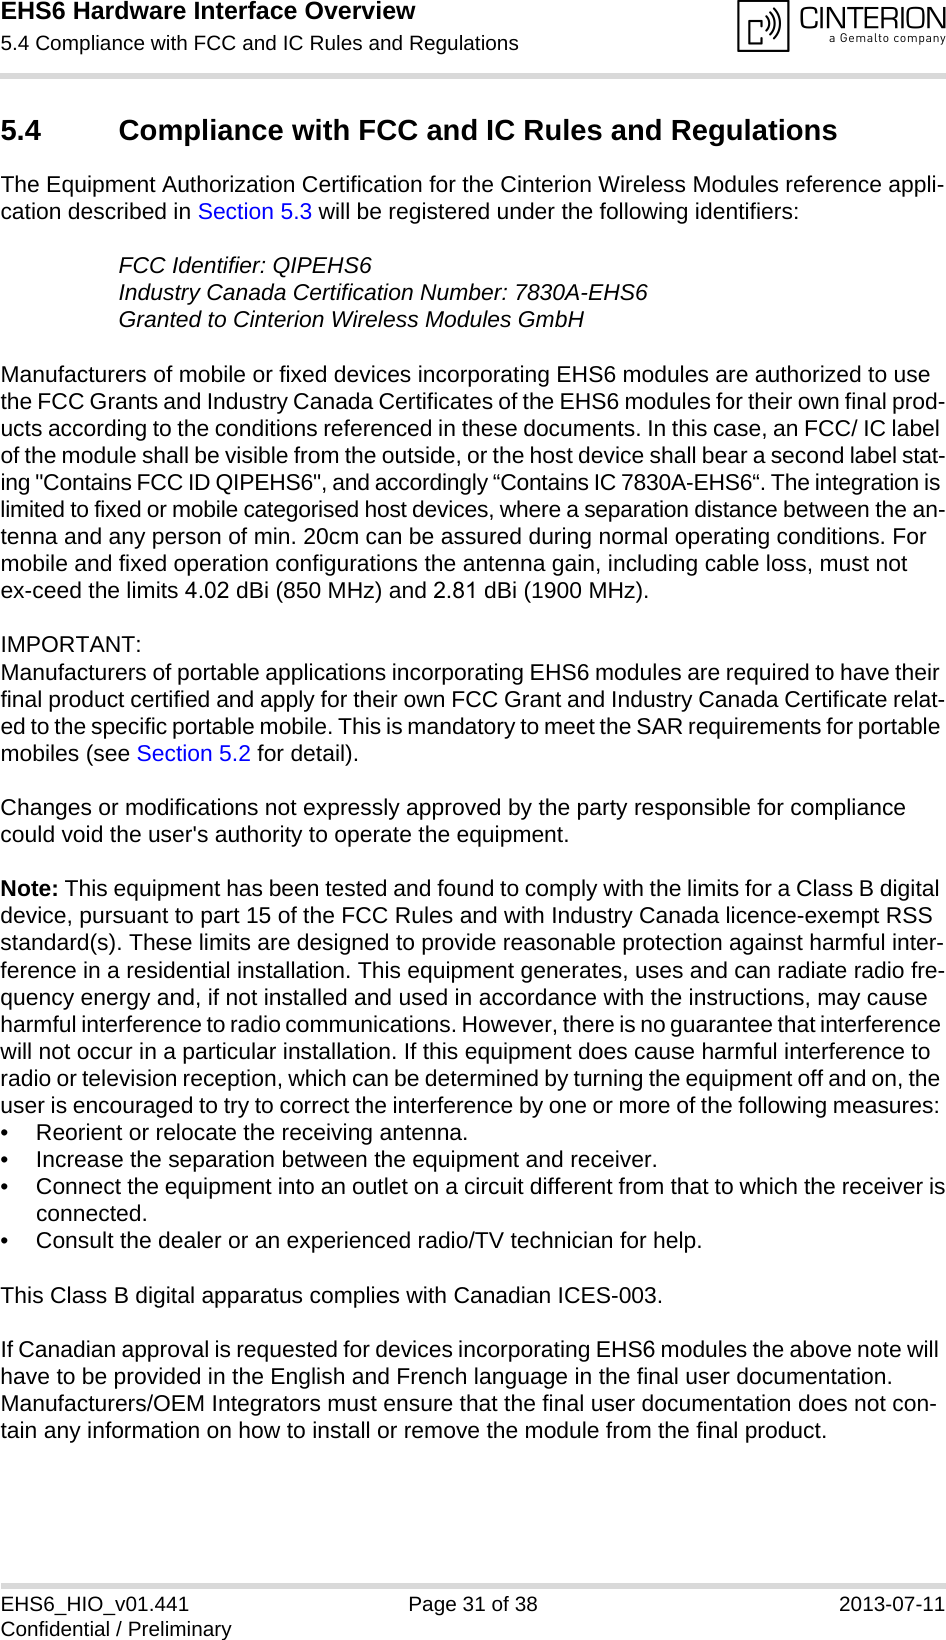 EHS6 Hardware Interface Overview5.4 Compliance with FCC and IC Rules and Regulations31EHS6_HIO_v01.441 Page 31 of 38 2013-07-11Confidential / Preliminary5.4 Compliance with FCC and IC Rules and RegulationsThe Equipment Authorization Certification for the Cinterion Wireless Modules reference appli-cation described in Section 5.3 will be registered under the following identifiers:FCC Identifier: QIPEHS6Industry Canada Certification Number: 7830A-EHS6Granted to Cinterion Wireless Modules GmbH Manufacturers of mobile or fixed devices incorporating EHS6 modules are authorized to use the FCC Grants and Industry Canada Certificates of the EHS6 modules for their own final prod-ucts according to the conditions referenced in these documents. In this case, an FCC/ IC label of the module shall be visible from the outside, or the host device shall bear a second label stat-ing &quot;Contains FCC ID QIPEHS6&quot;, and accordingly “Contains IC 7830A-EHS6“. The integration is limited to fixed or mobile categorised host devices, where a separation distance between the an-tenna and any person of min. 20cm can be assured during normal operating conditions. For mobile and fixed operation configurations the antenna gain, including cable loss, must not ex-ceed the limits 4.02 dBi (850 MHz) and 2.81 dBi (1900 MHz).IMPORTANT: Manufacturers of portable applications incorporating EHS6 modules are required to have their final product certified and apply for their own FCC Grant and Industry Canada Certificate relat-ed to the specific portable mobile. This is mandatory to meet the SAR requirements for portable mobiles (see Section 5.2 for detail).Changes or modifications not expressly approved by the party responsible for compliance could void the user&apos;s authority to operate the equipment.Note: This equipment has been tested and found to comply with the limits for a Class B digital device, pursuant to part 15 of the FCC Rules and with Industry Canada licence-exempt RSS standard(s). These limits are designed to provide reasonable protection against harmful inter-ference in a residential installation. This equipment generates, uses and can radiate radio fre-quency energy and, if not installed and used in accordance with the instructions, may cause harmful interference to radio communications. However, there is no guarantee that interference will not occur in a particular installation. If this equipment does cause harmful interference to radio or television reception, which can be determined by turning the equipment off and on, the user is encouraged to try to correct the interference by one or more of the following measures: • Reorient or relocate the receiving antenna.• Increase the separation between the equipment and receiver.• Connect the equipment into an outlet on a circuit different from that to which the receiver isconnected.• Consult the dealer or an experienced radio/TV technician for help.This Class B digital apparatus complies with Canadian ICES-003.If Canadian approval is requested for devices incorporating EHS6 modules the above note will have to be provided in the English and French language in the final user documentation. Manufacturers/OEM Integrators must ensure that the final user documentation does not con-tain any information on how to install or remove the module from the final product.